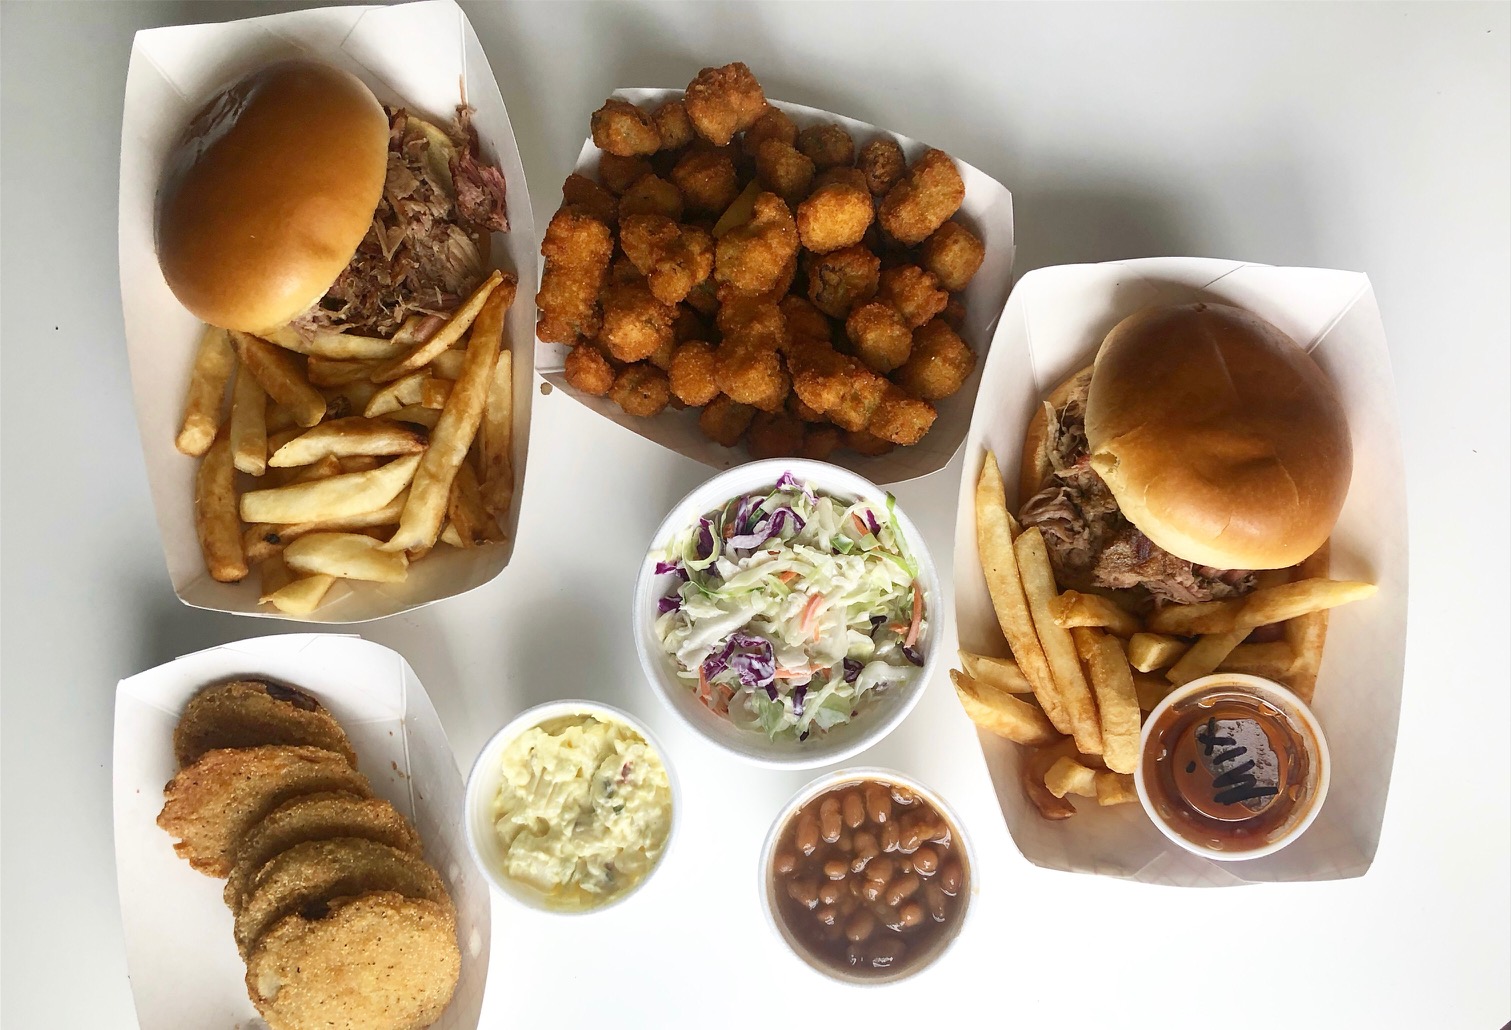 An overhead photo of the author's dinner with two pulled pork sandwiches, a basket of fried okra balls, a big cup of coleslaw, a small cup of potato salad, a small cup of baked beans, and a basket of fried green tomatoes. Photo by Alyssa Buckley.